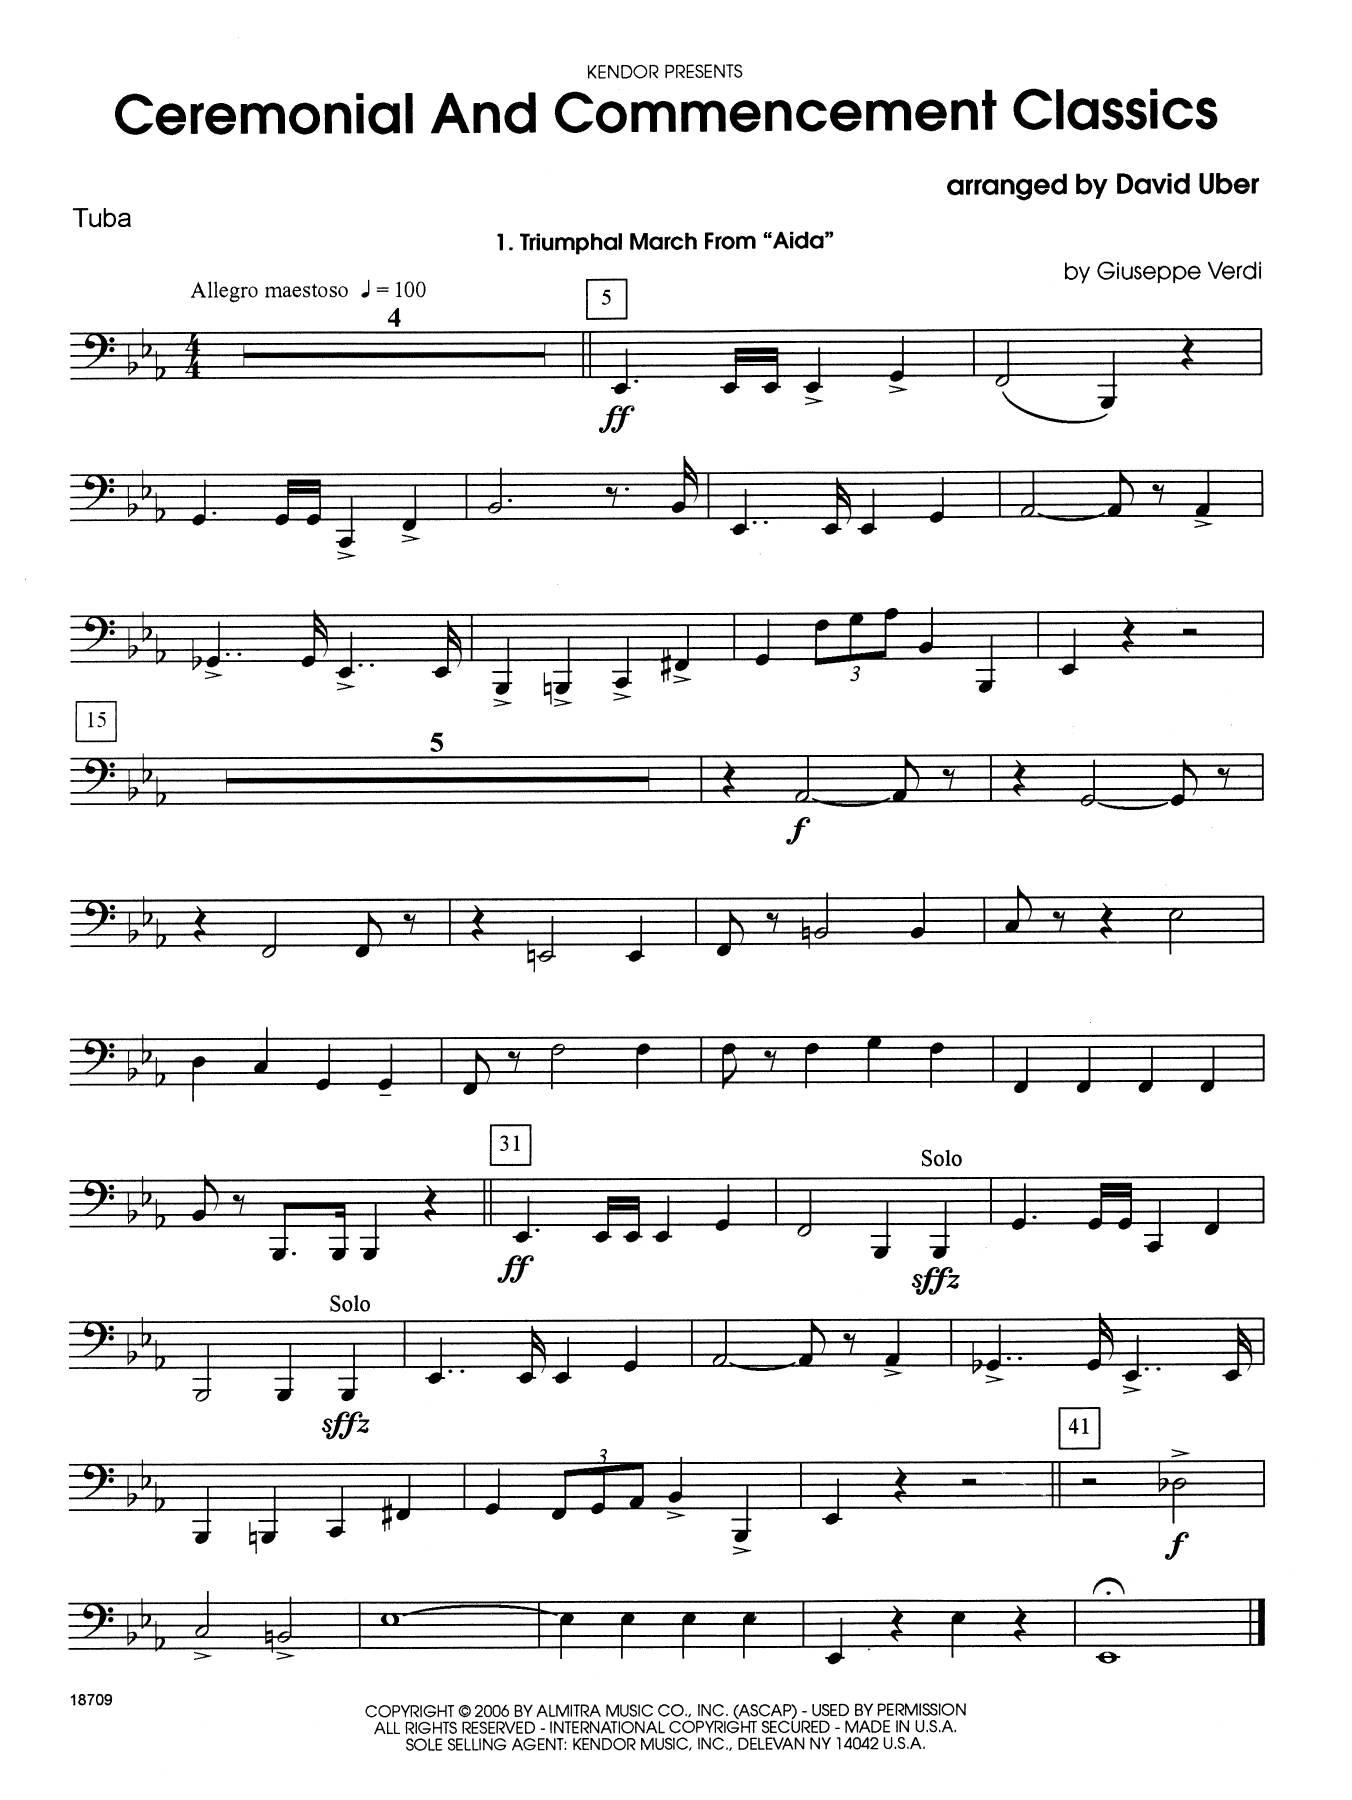 Download David Uber Ceremonial And Commencement Classics - Sheet Music